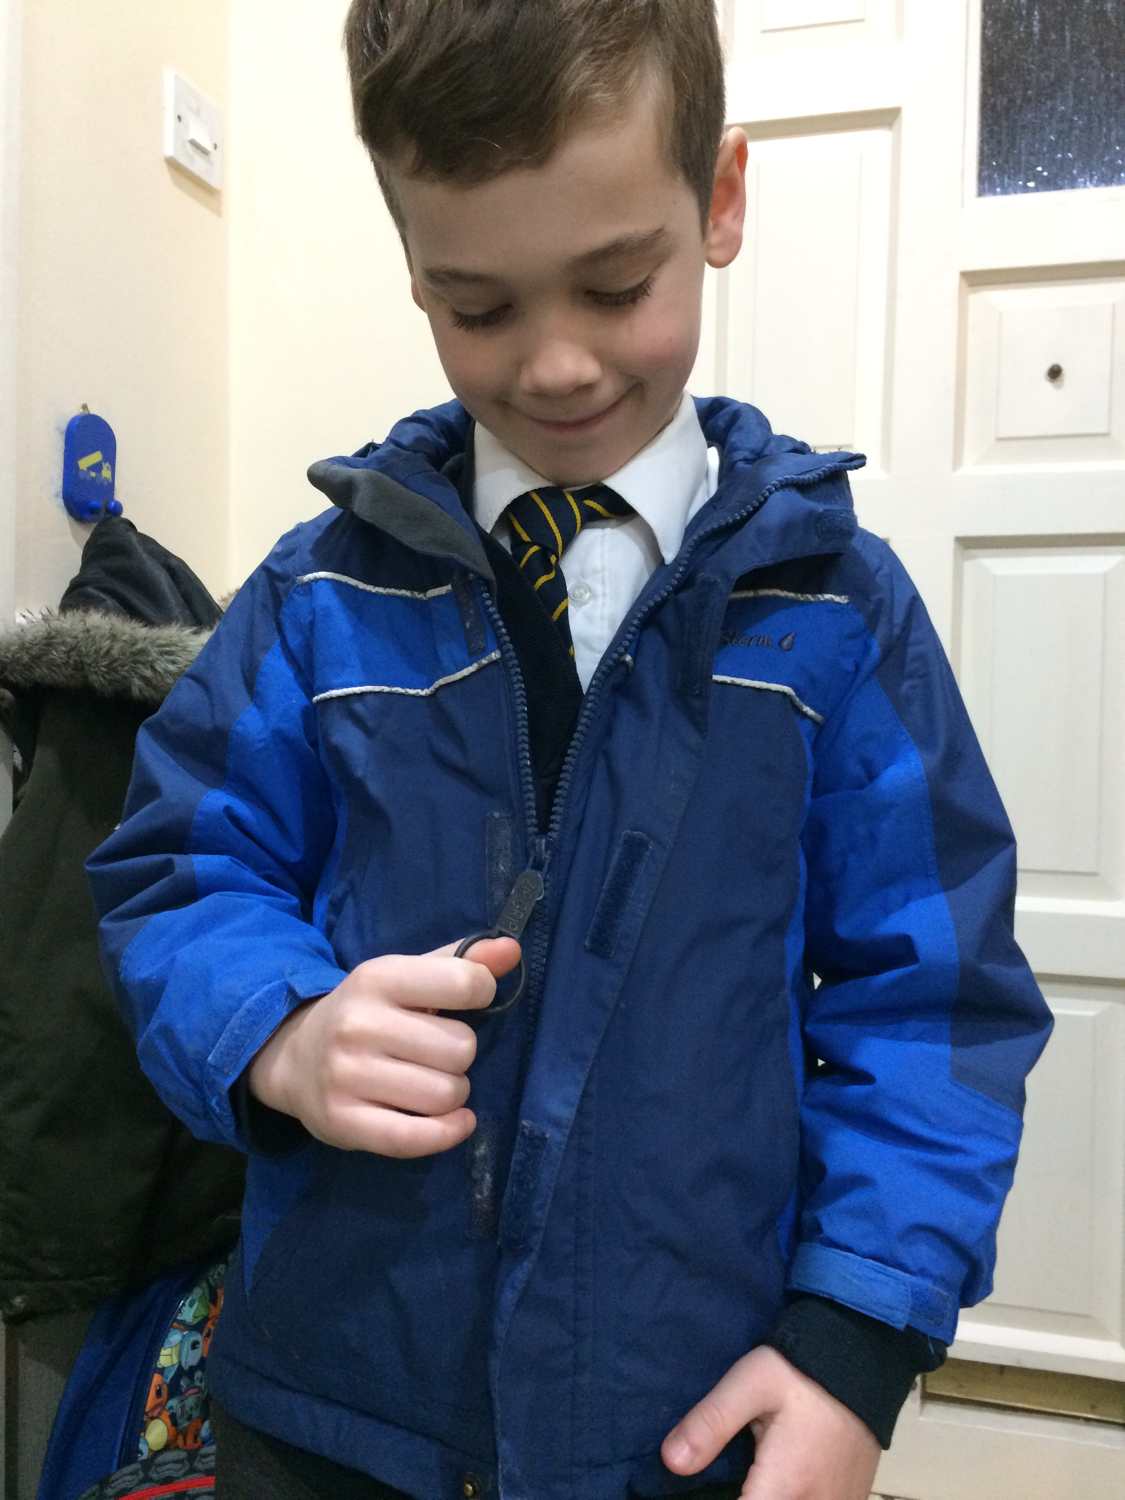 Child zips up coat using a ZipGrip with his thumb through the large loop